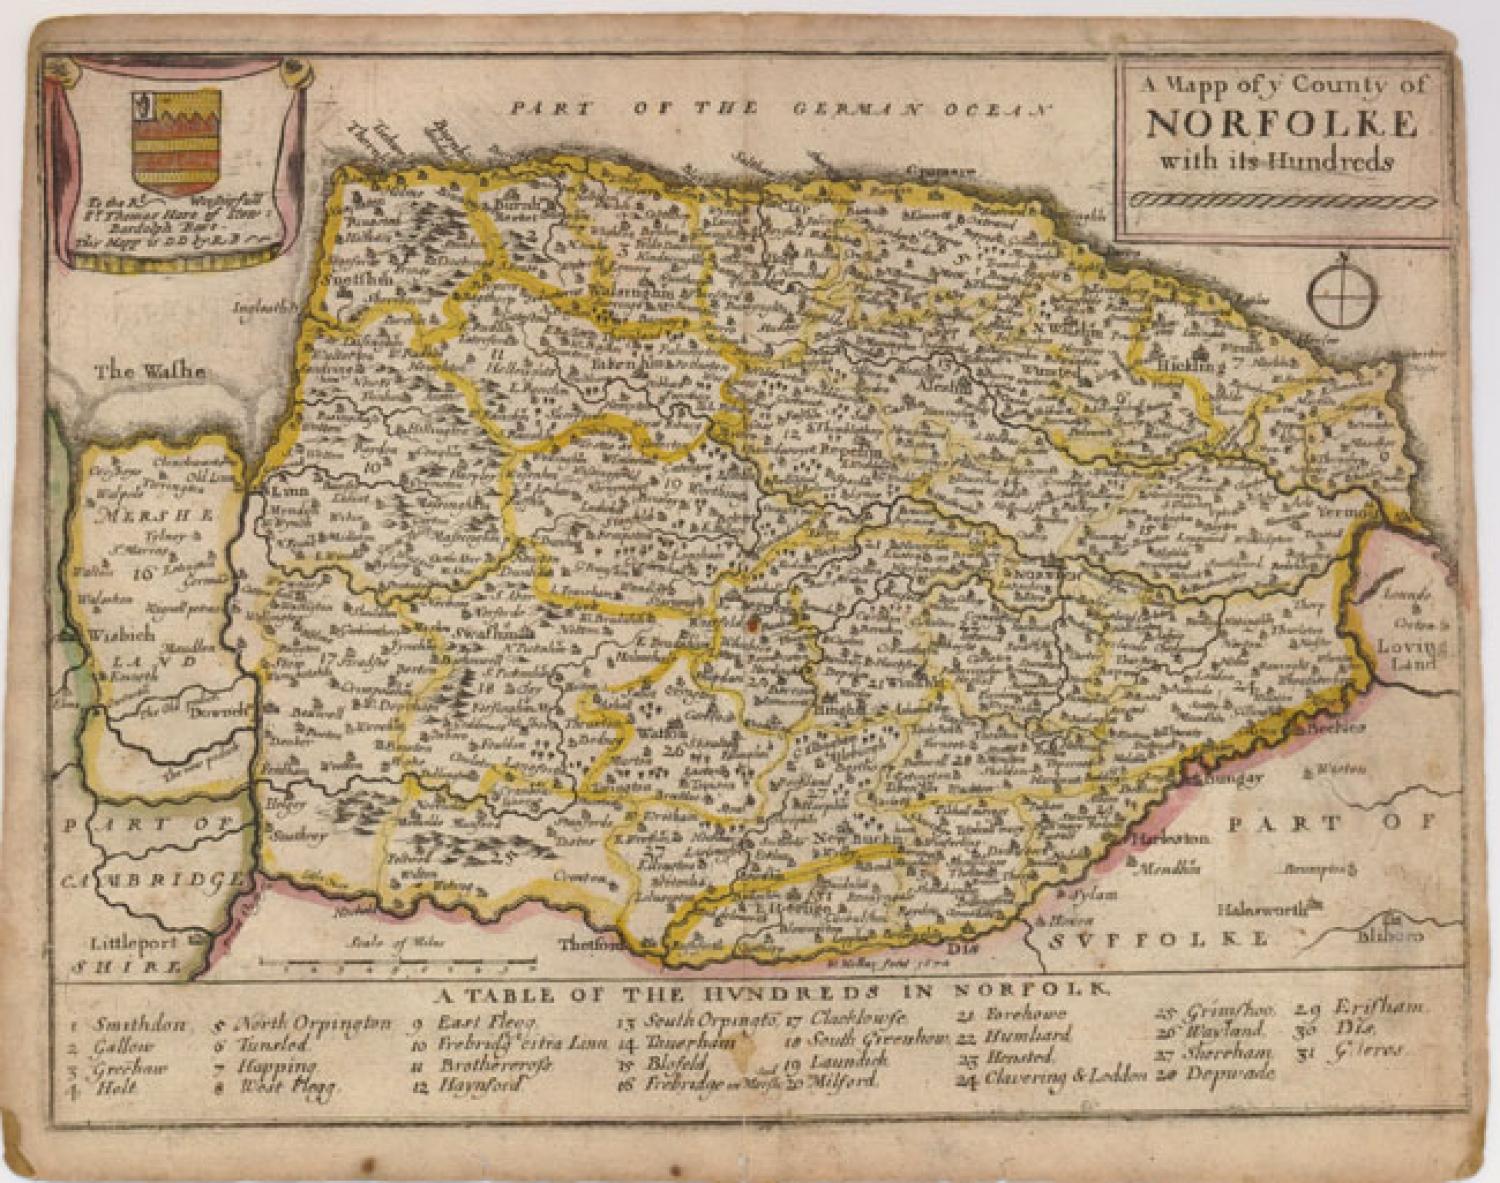 Blome - A Mapp of ye County of Norfolke